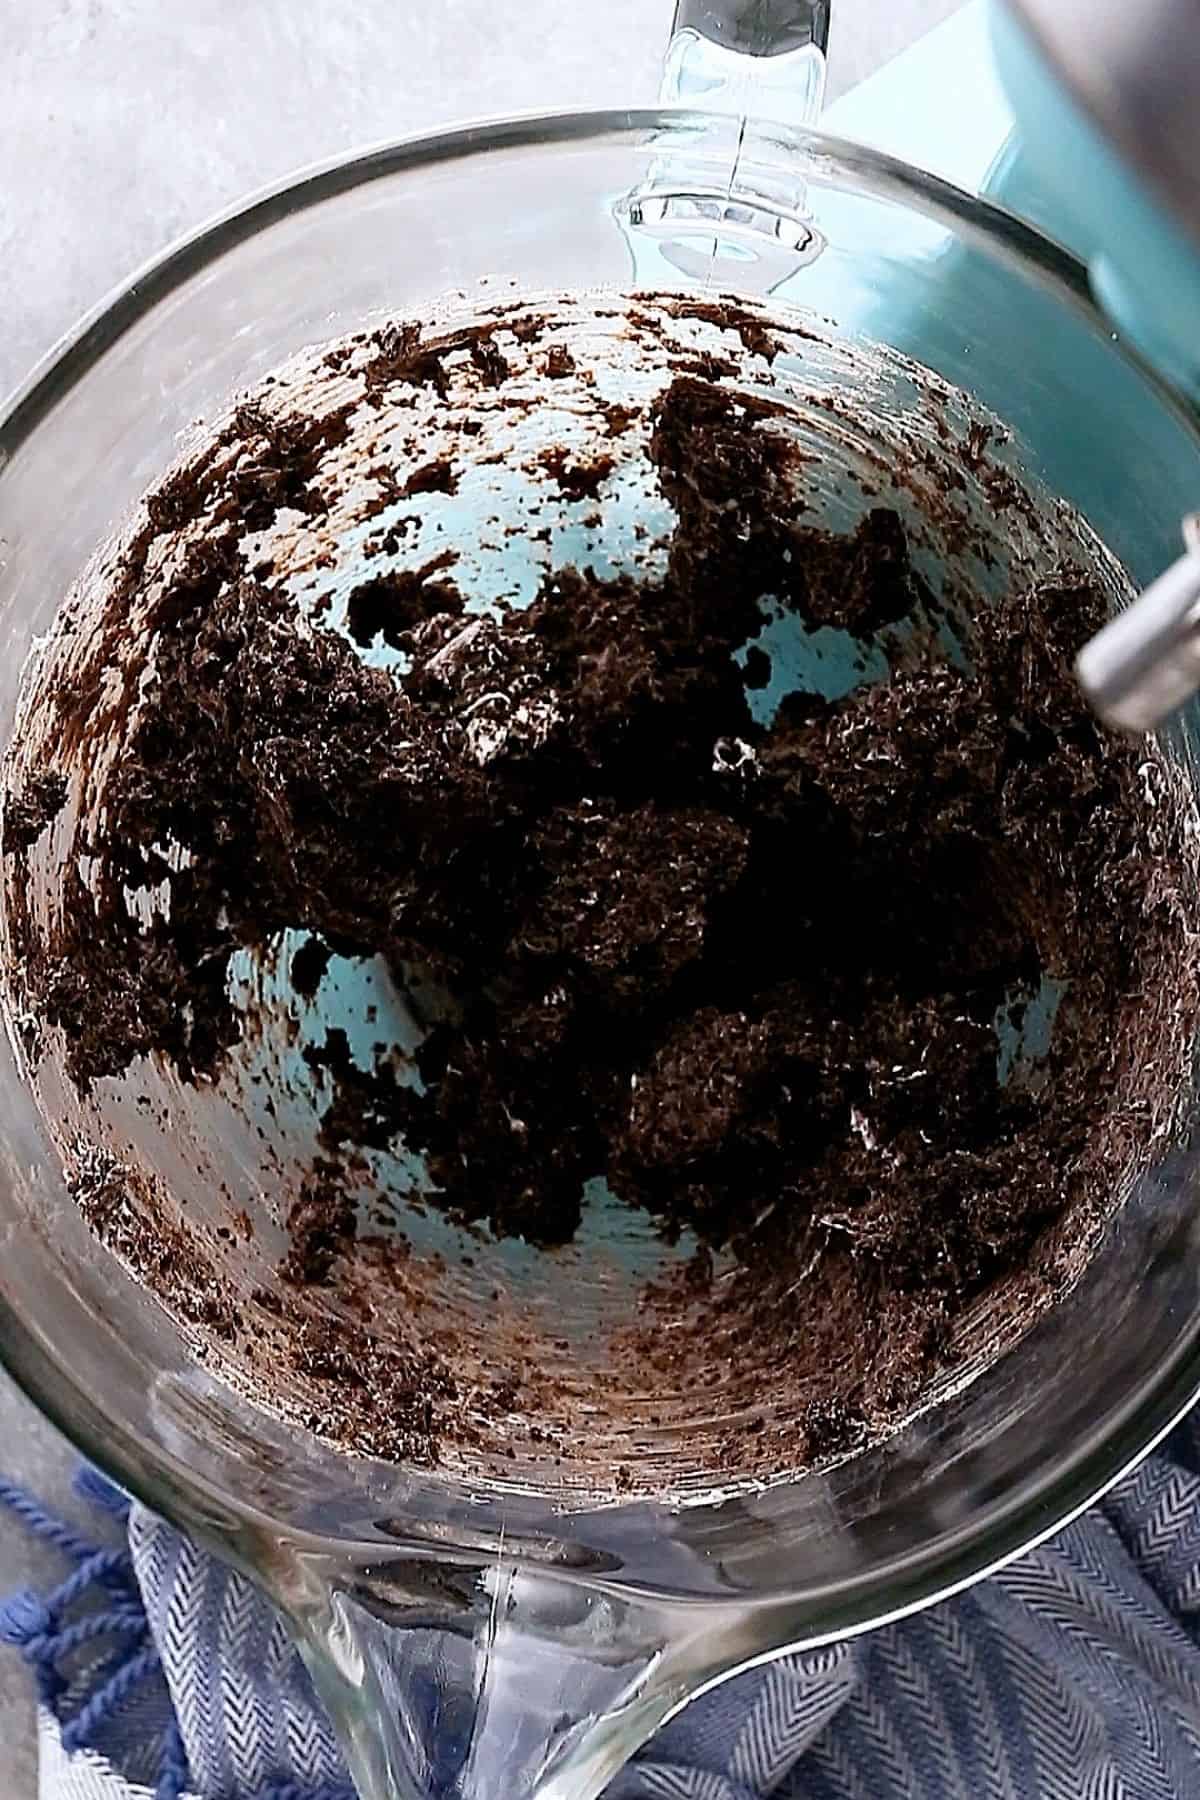 oreo balls dough mixture in the bowl of a stand mixer.